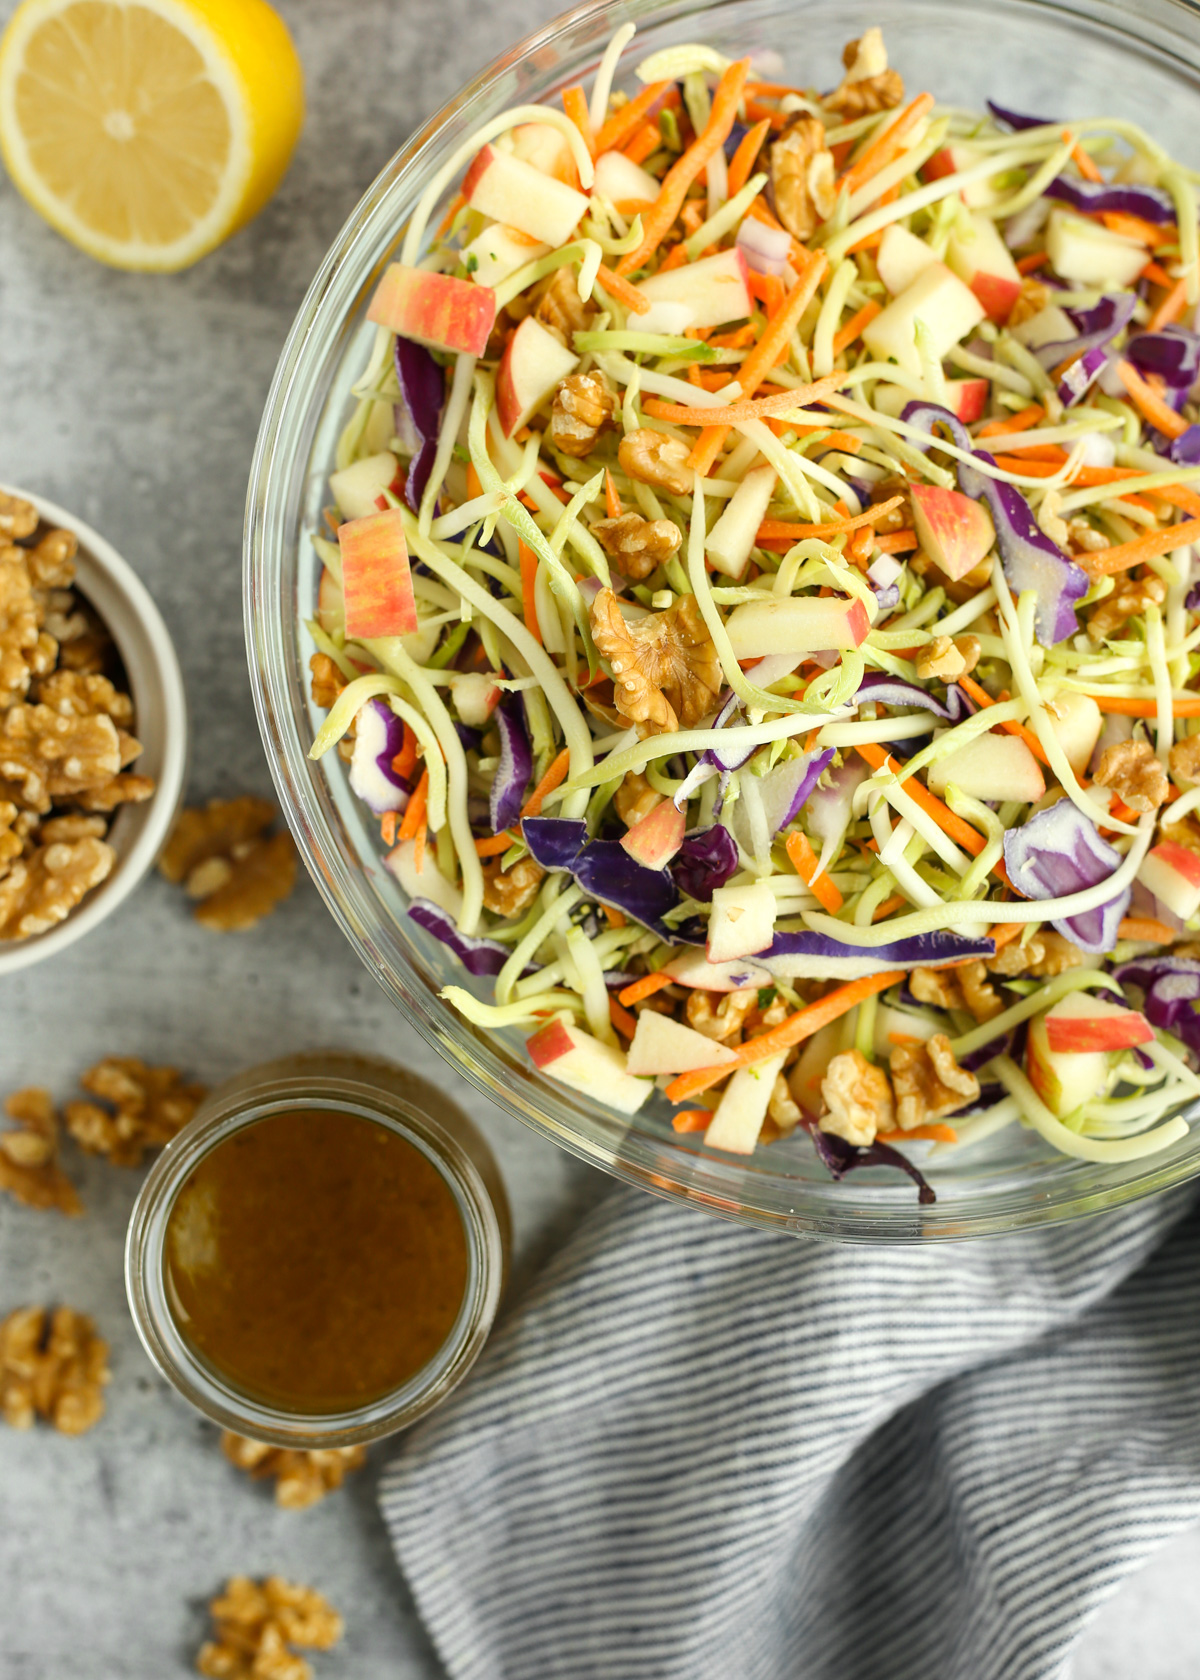 Overhead image of an undressed mixture of broccoli slaw, carrots, red cabbage, diced red onion and apples, and walnut pieces, with a dairy-free dressing on the side about to be mixed in